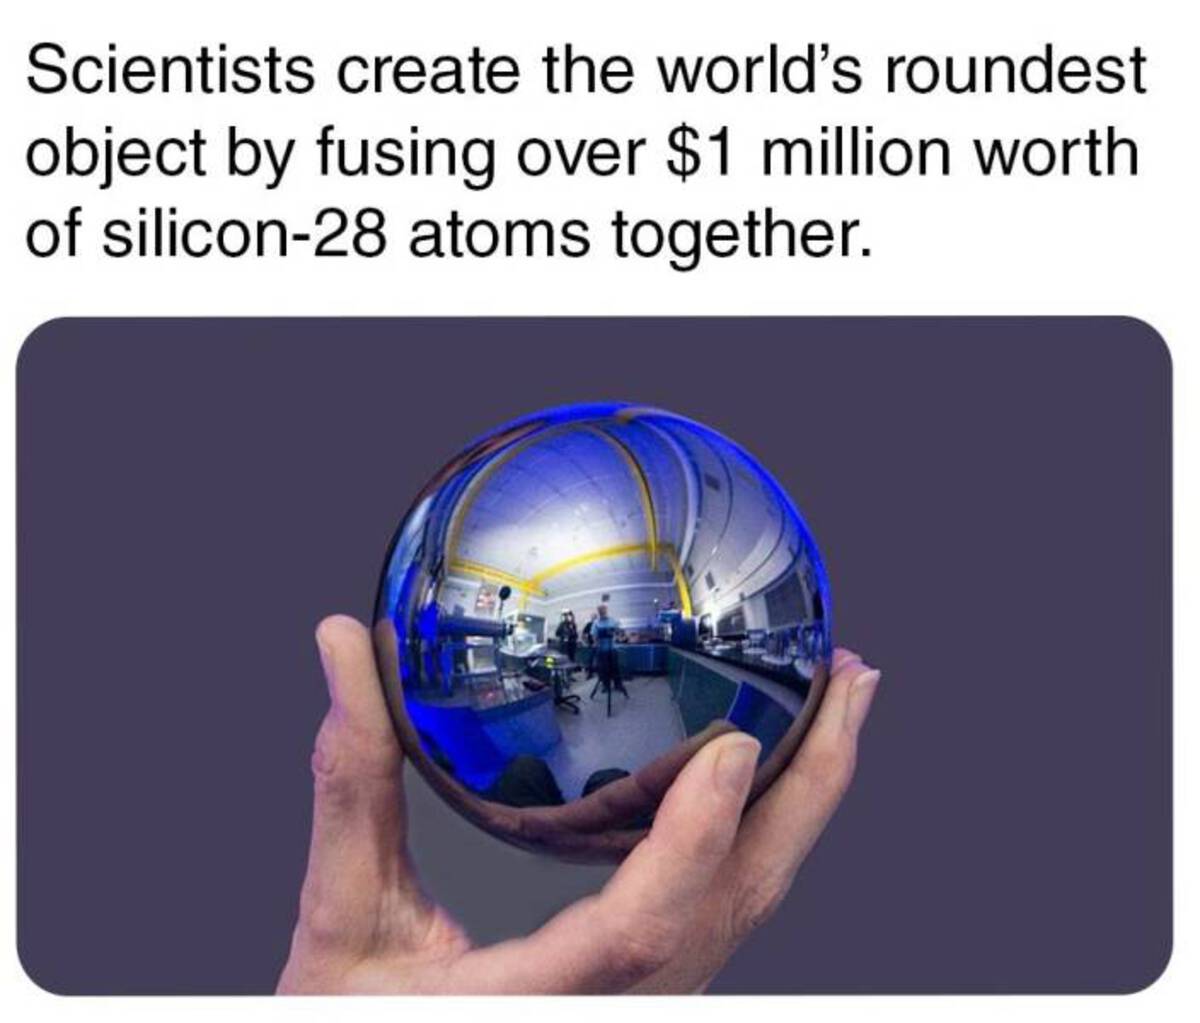 smoothest thing in the world - Scientists create the world's roundest object by fusing over $1 million worth of silicon28 atoms together.